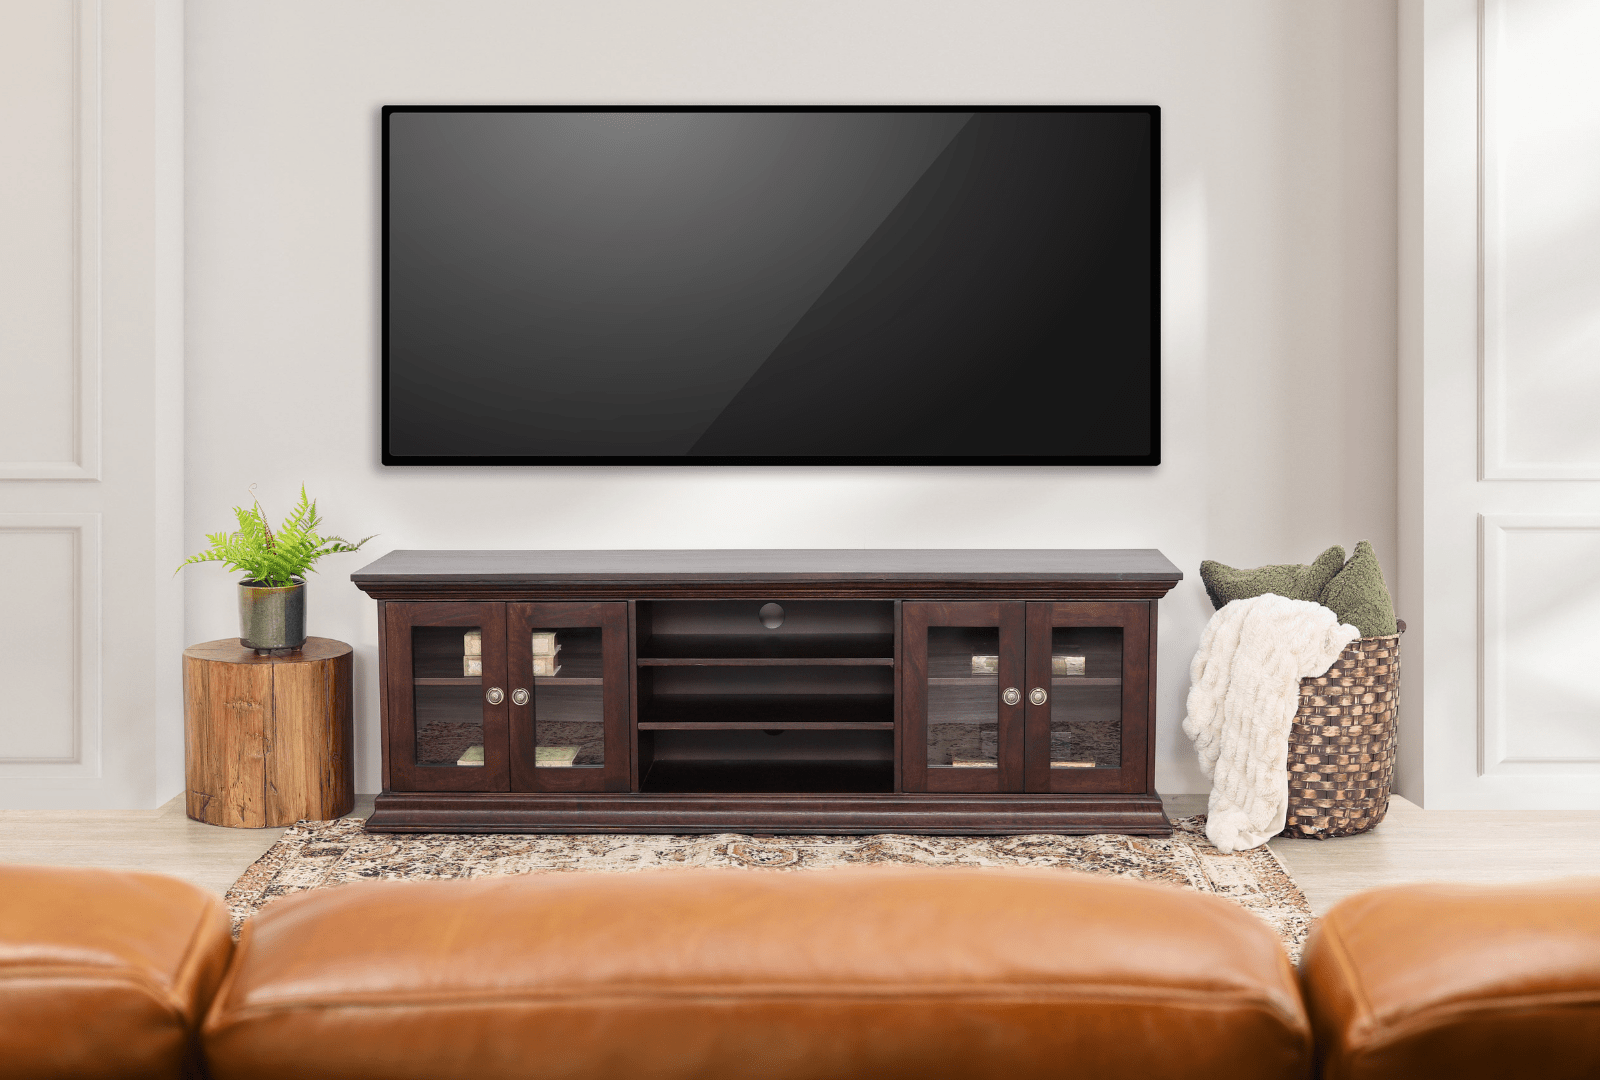 A Comprehensive Guide to Enhancing Your Home Entertainment Setup: 10 Tips for Choosing the Ideal TV Unit